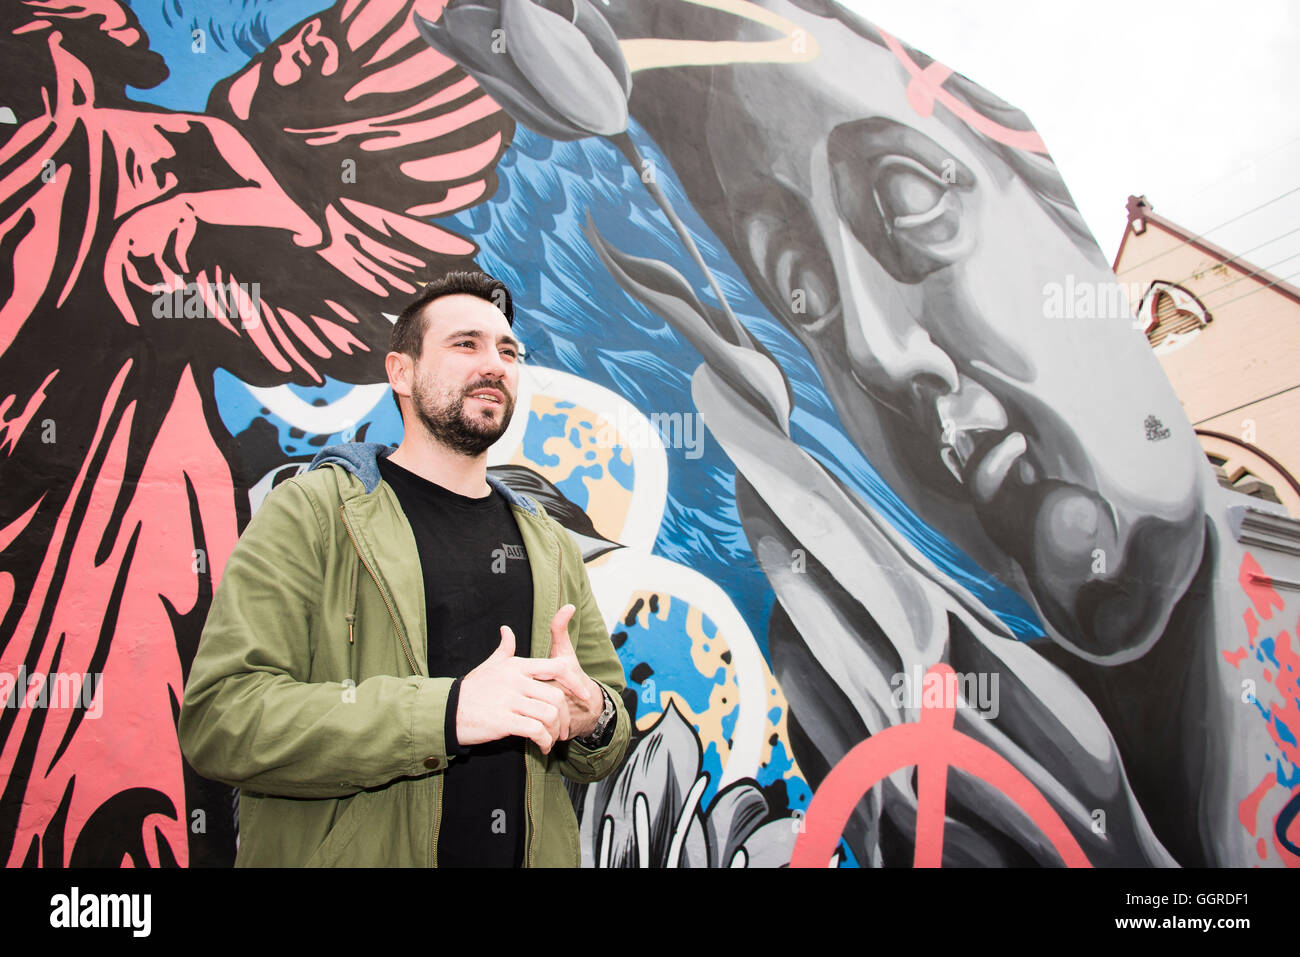 Street artist 'Alex Lehours' poses for a photograph with his newly commissioned street artwork 'The Devine Within' on a terrace house in Newtown  Perfect Match is a inner city council initiative inviting local property owners to find their Perfect Match by registering interest to have graffitied walls transformed by renowned street artists. © Hugh Peterswald/Alamy Live News Stock Photo